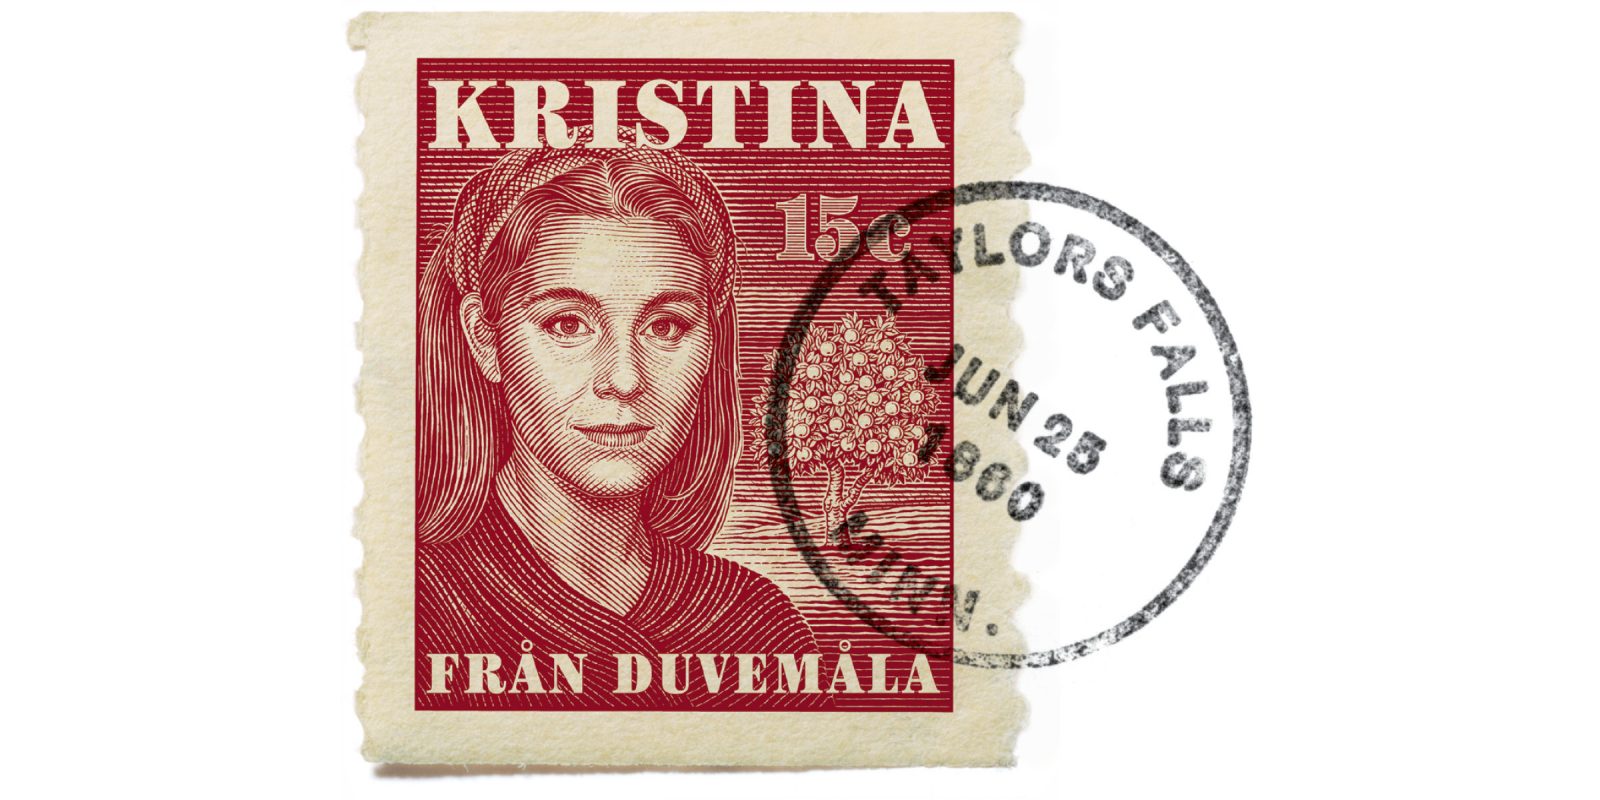 A postage stamp printed in red featuring an image of a woman and an apple tree with the words “Kristina from Duvemala” in Swedish and 15 cents with a black ink circle stamp that says, “TAYLORS FALLS MINN. JUN 25 1860.”